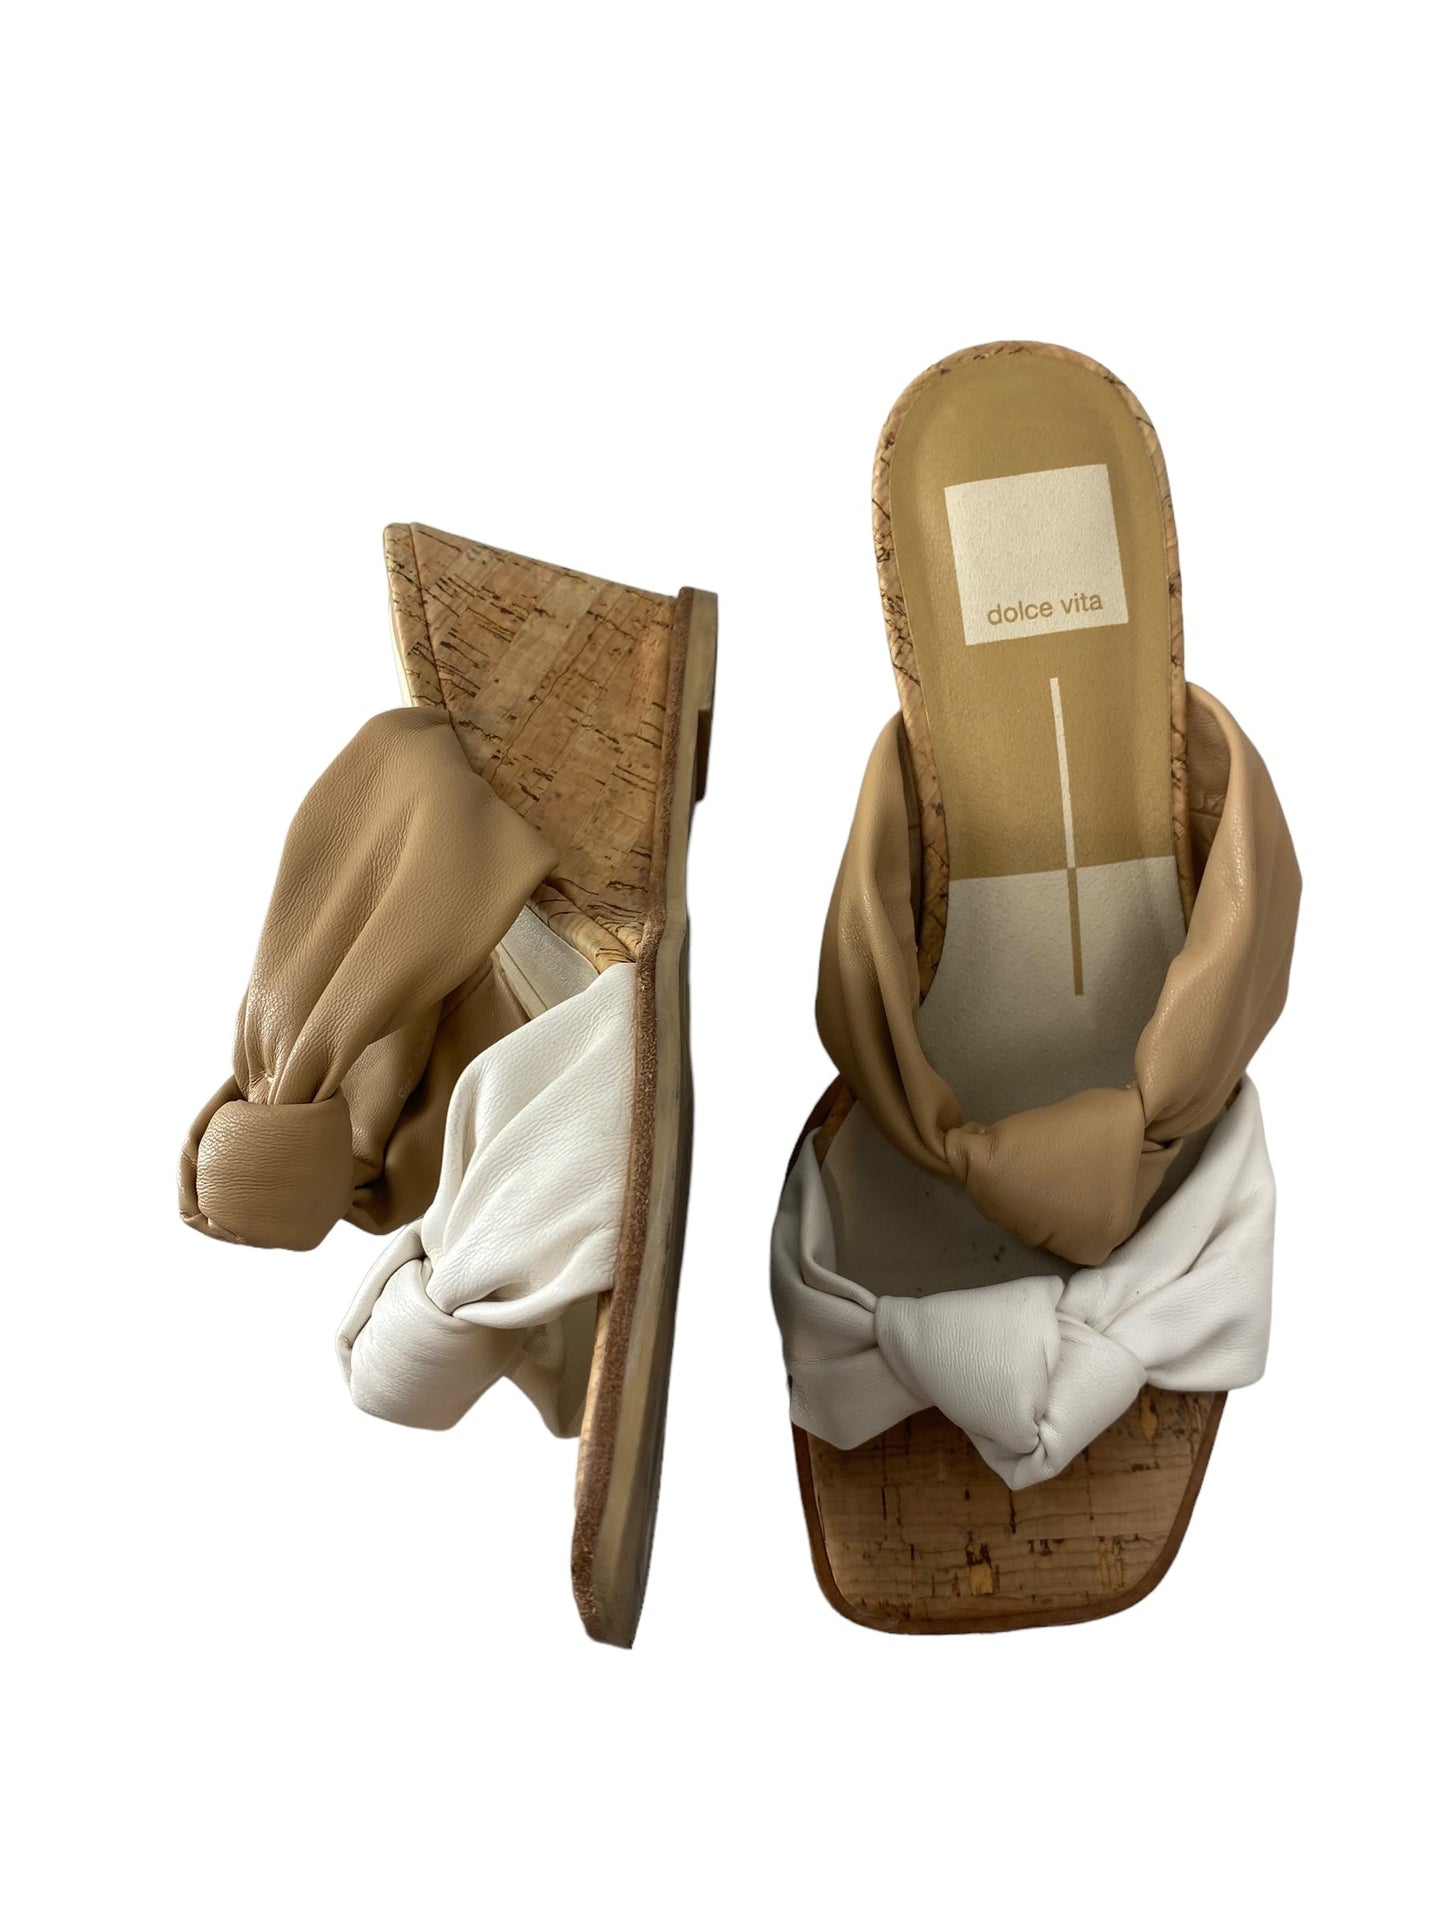 Sandals Heels Wedge By Dolce Vita  Size: 7